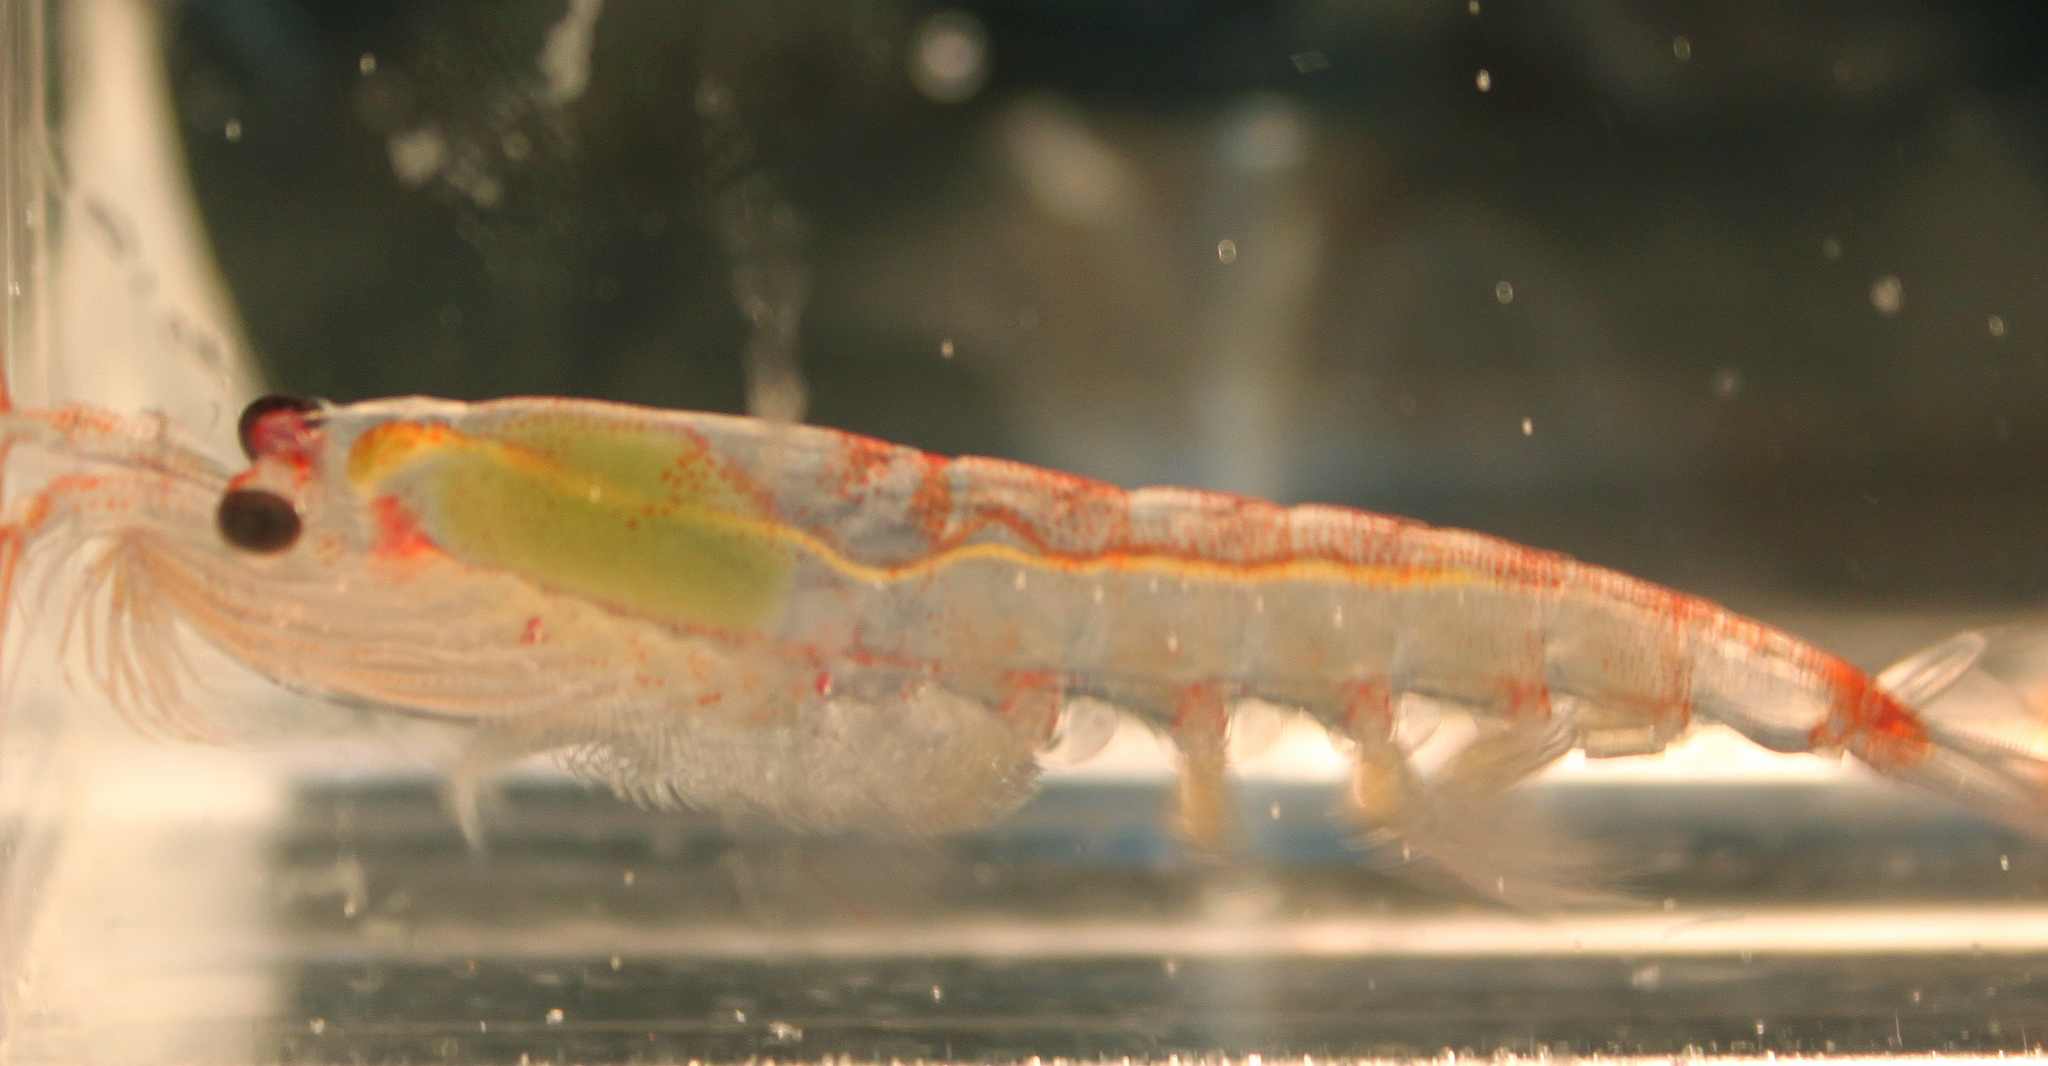 Norway: Mass Death of Krill Linked to Unreported Lice Treatment